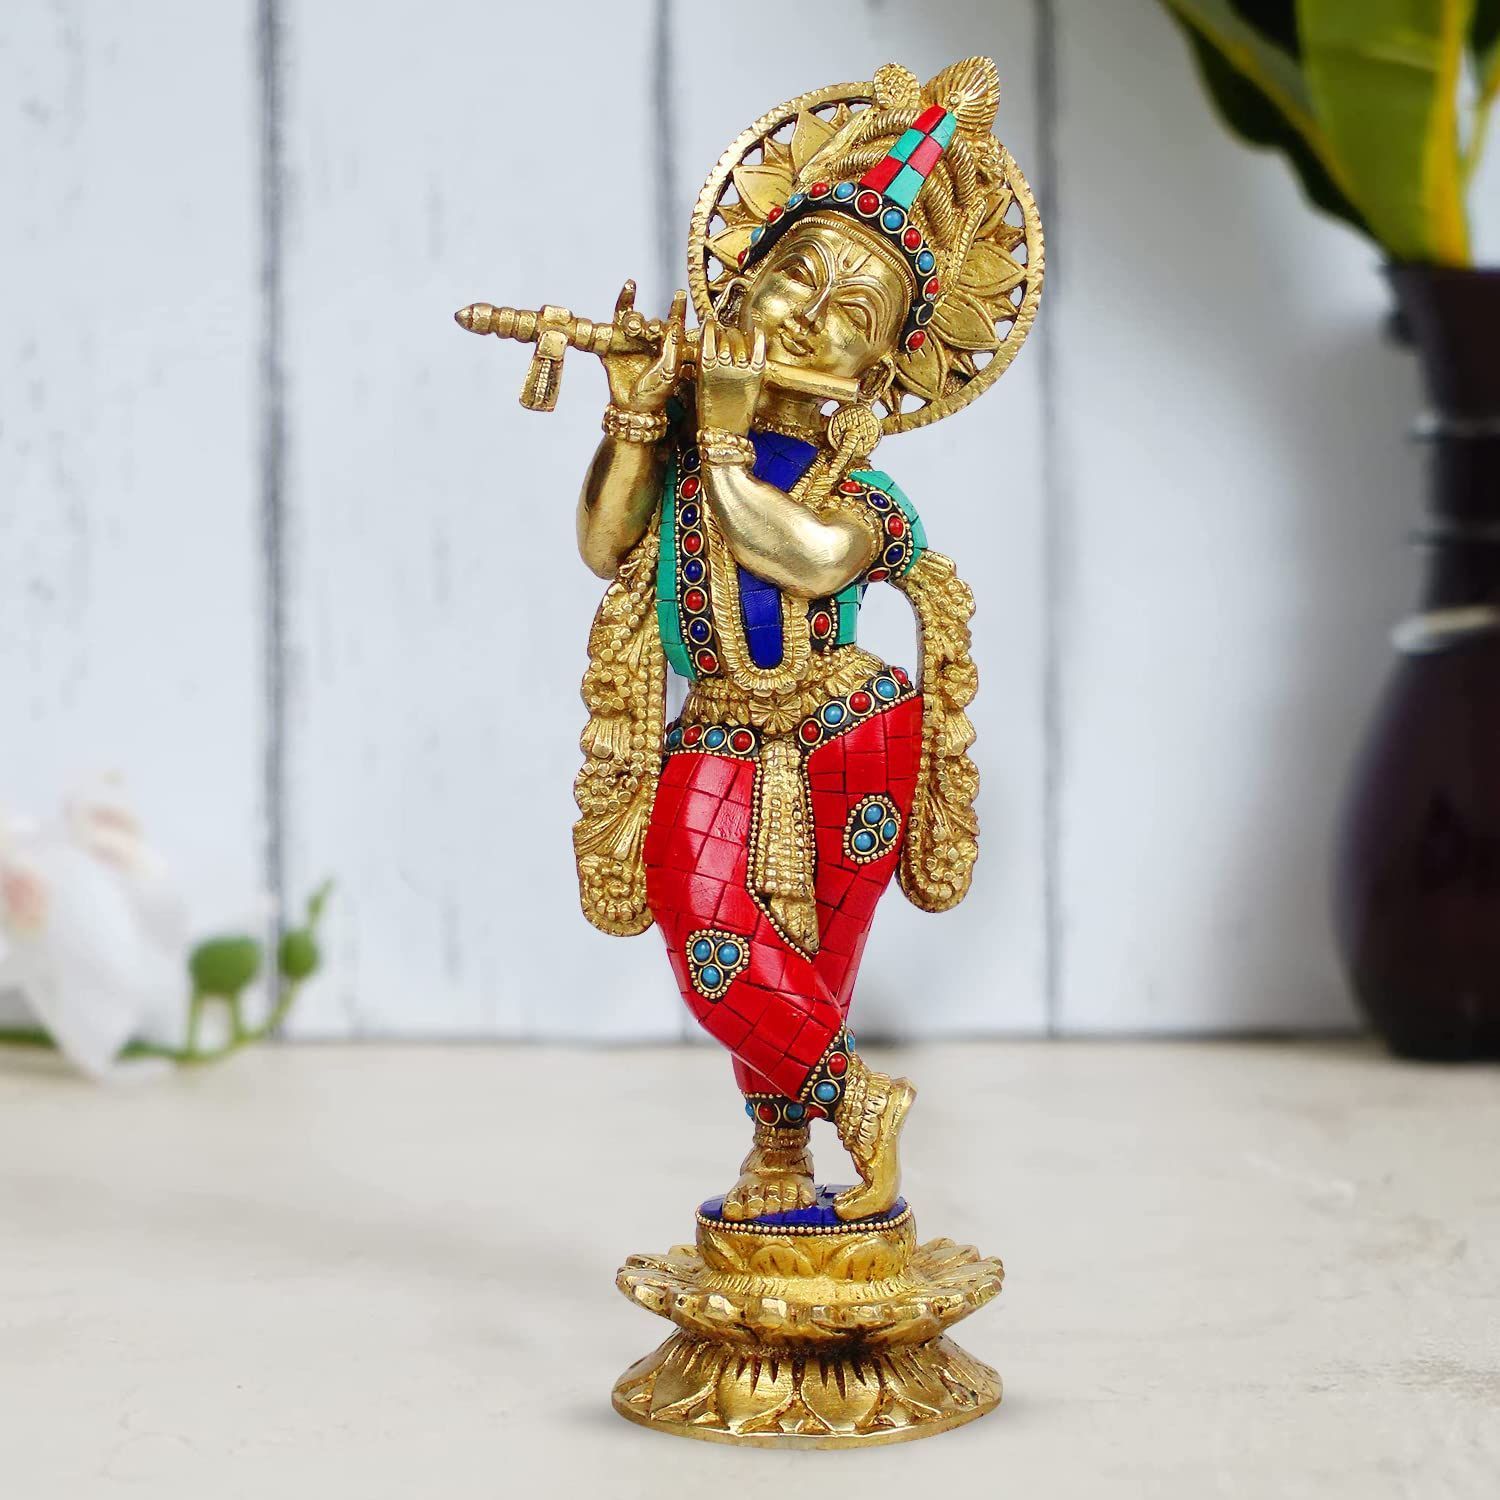 GOLDGIFTIDEAS 999 Silver and 24K Gold Plated Bal Krishna Idol with Cow, Krishna  Idol for Pooja Room, Occasional Gift (12 x 7 CM)